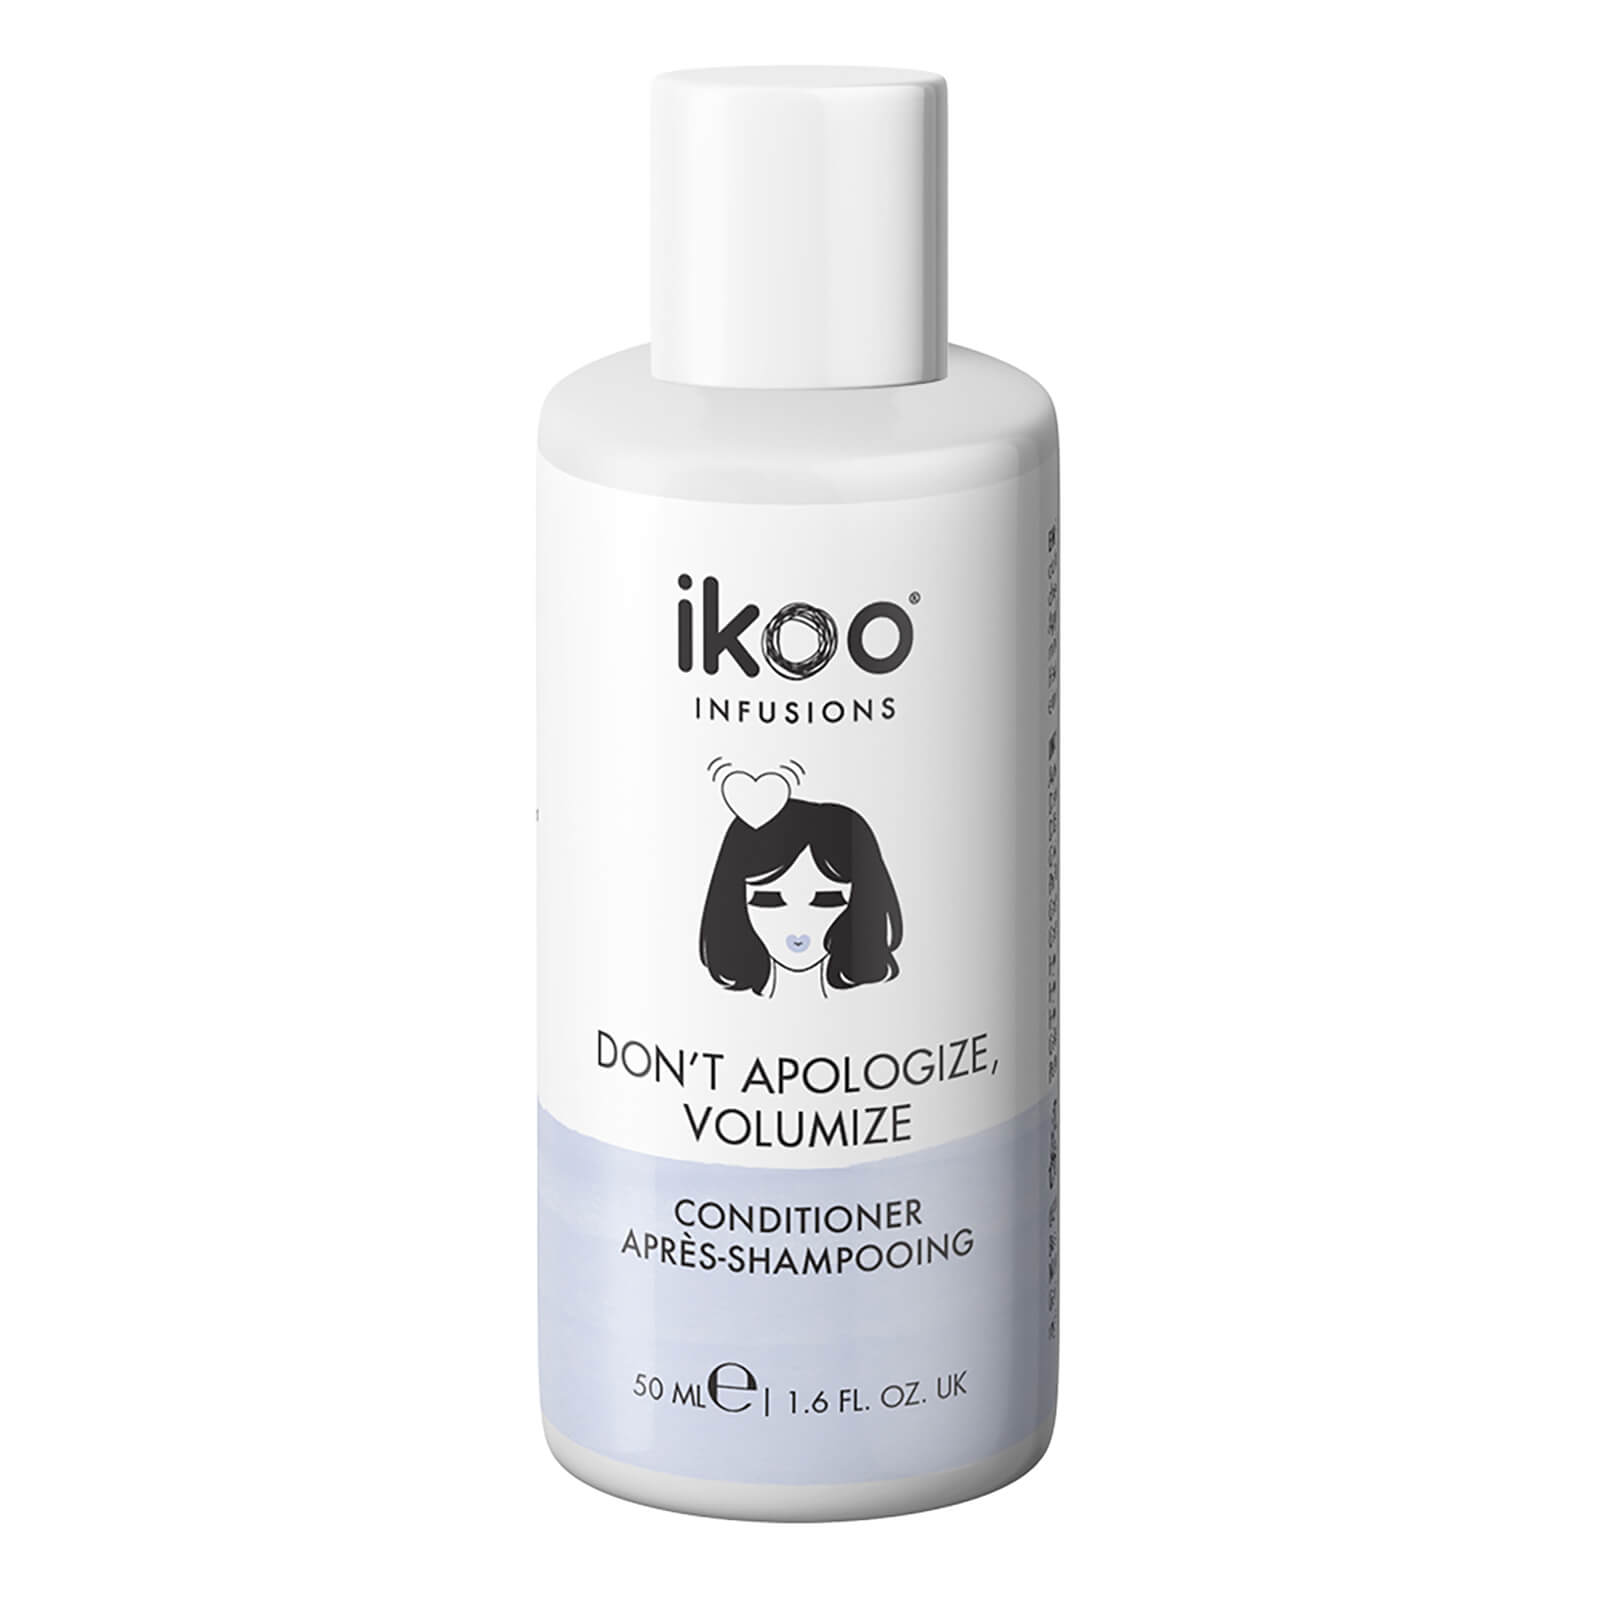 ikoo Conditioner - Don't Apologize, Volumize 50ml